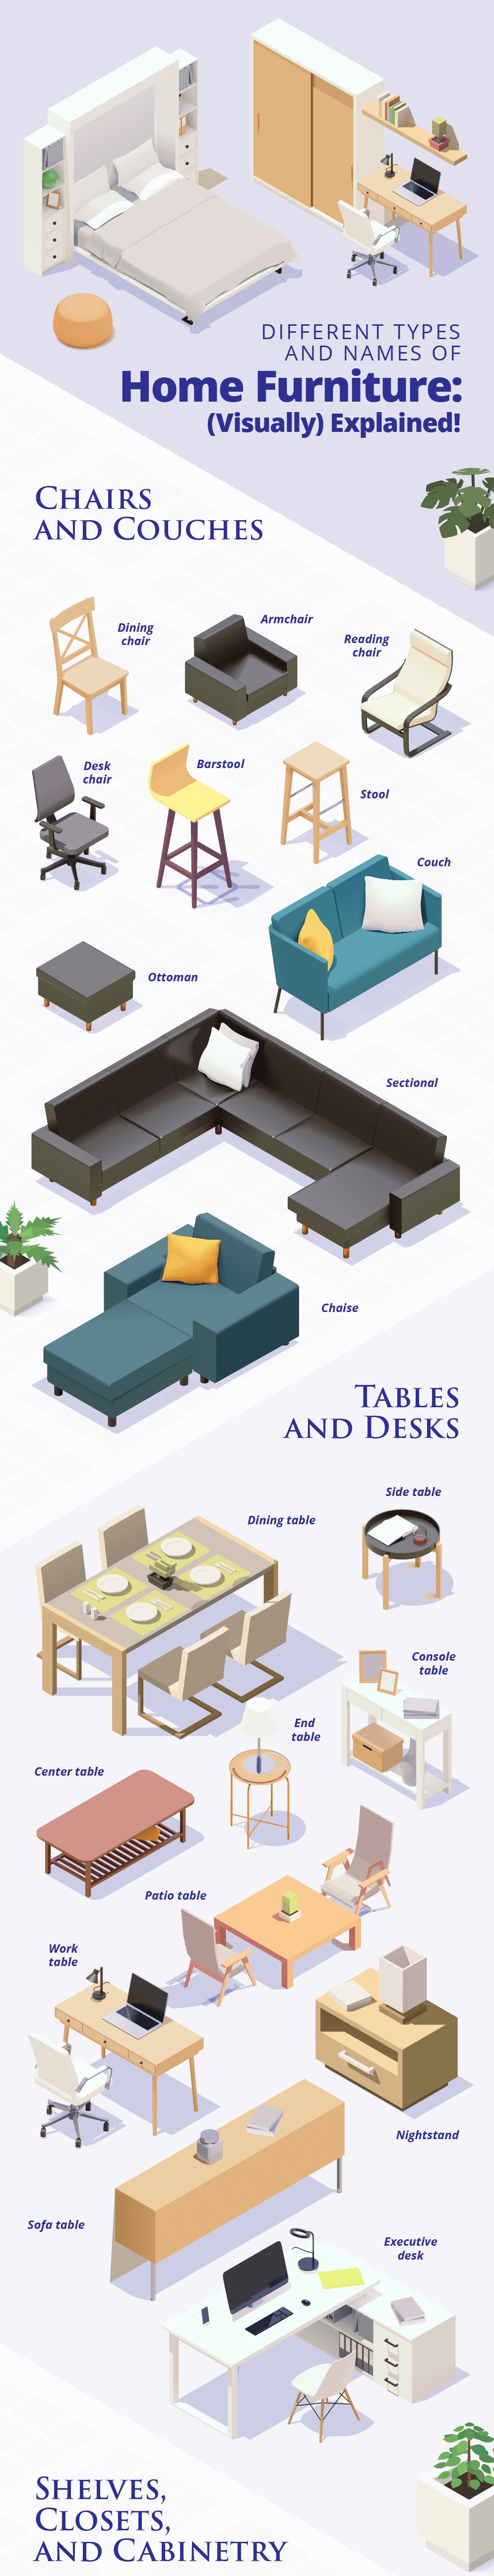 Different-Types-and-Names-of-Home-Furniture